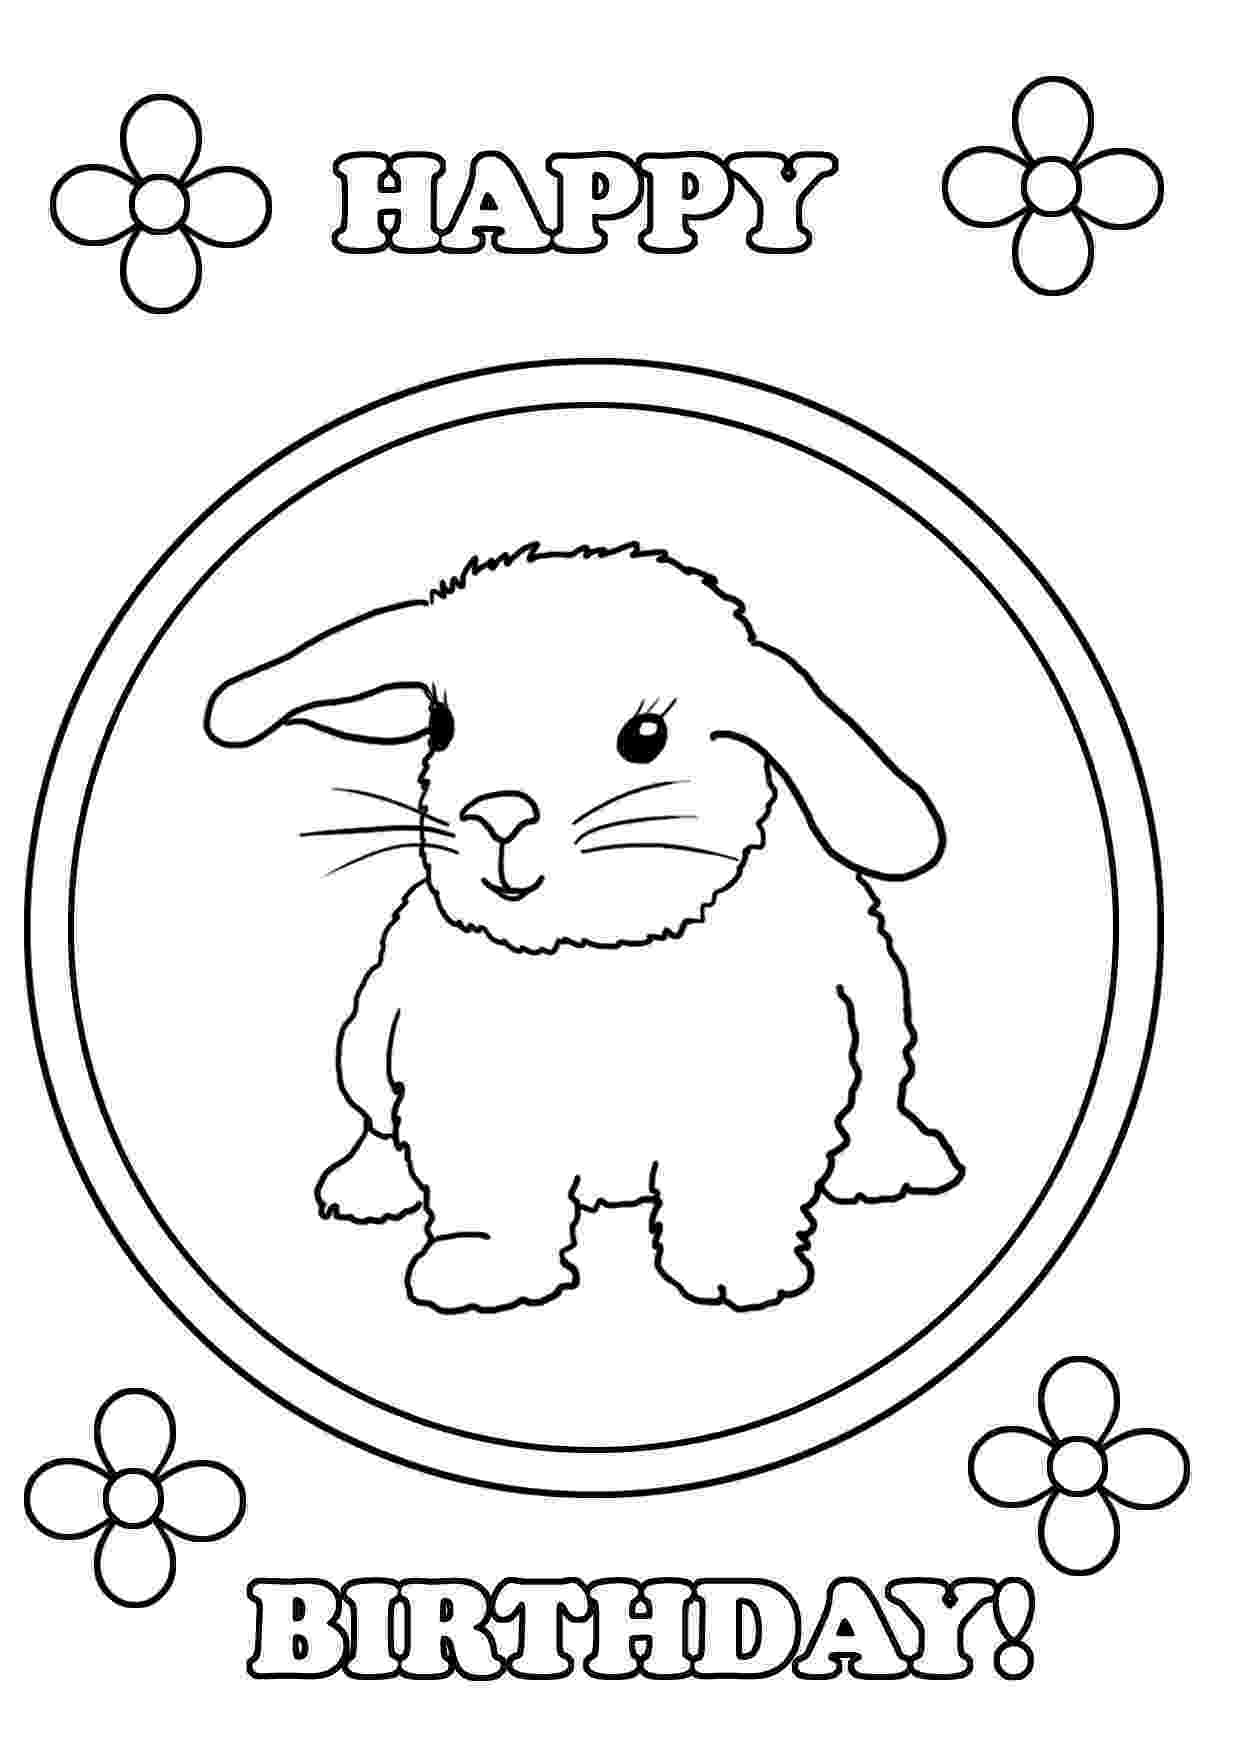 happy birthday coloring sheets happy birthday coloring pages to download and print for free coloring birthday happy sheets 